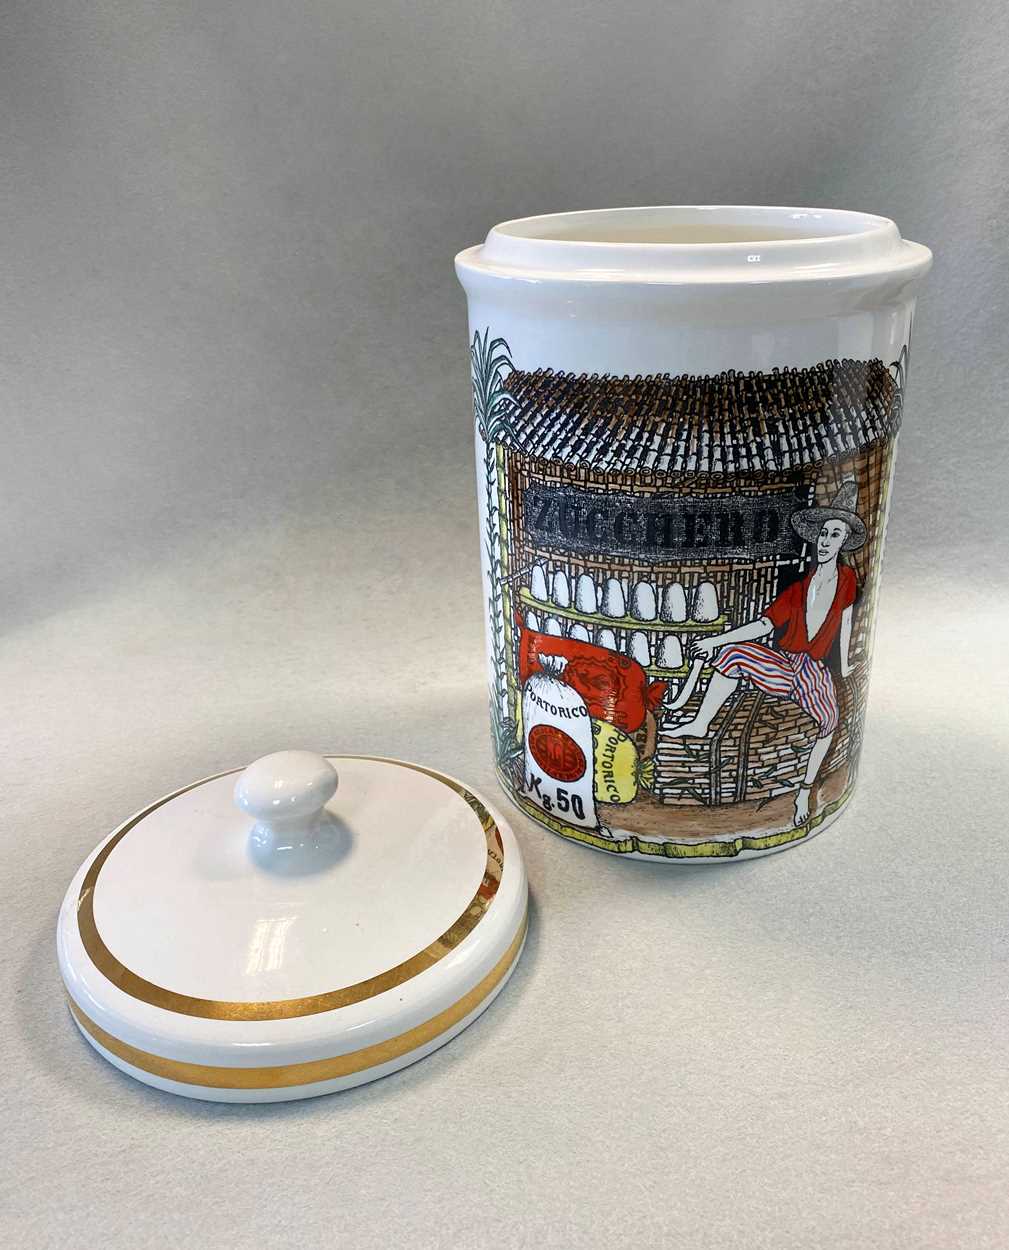 Piero Fornasetti for Fornasetti Milano, a transfer printed ceramic canister and cover, - Image 4 of 6